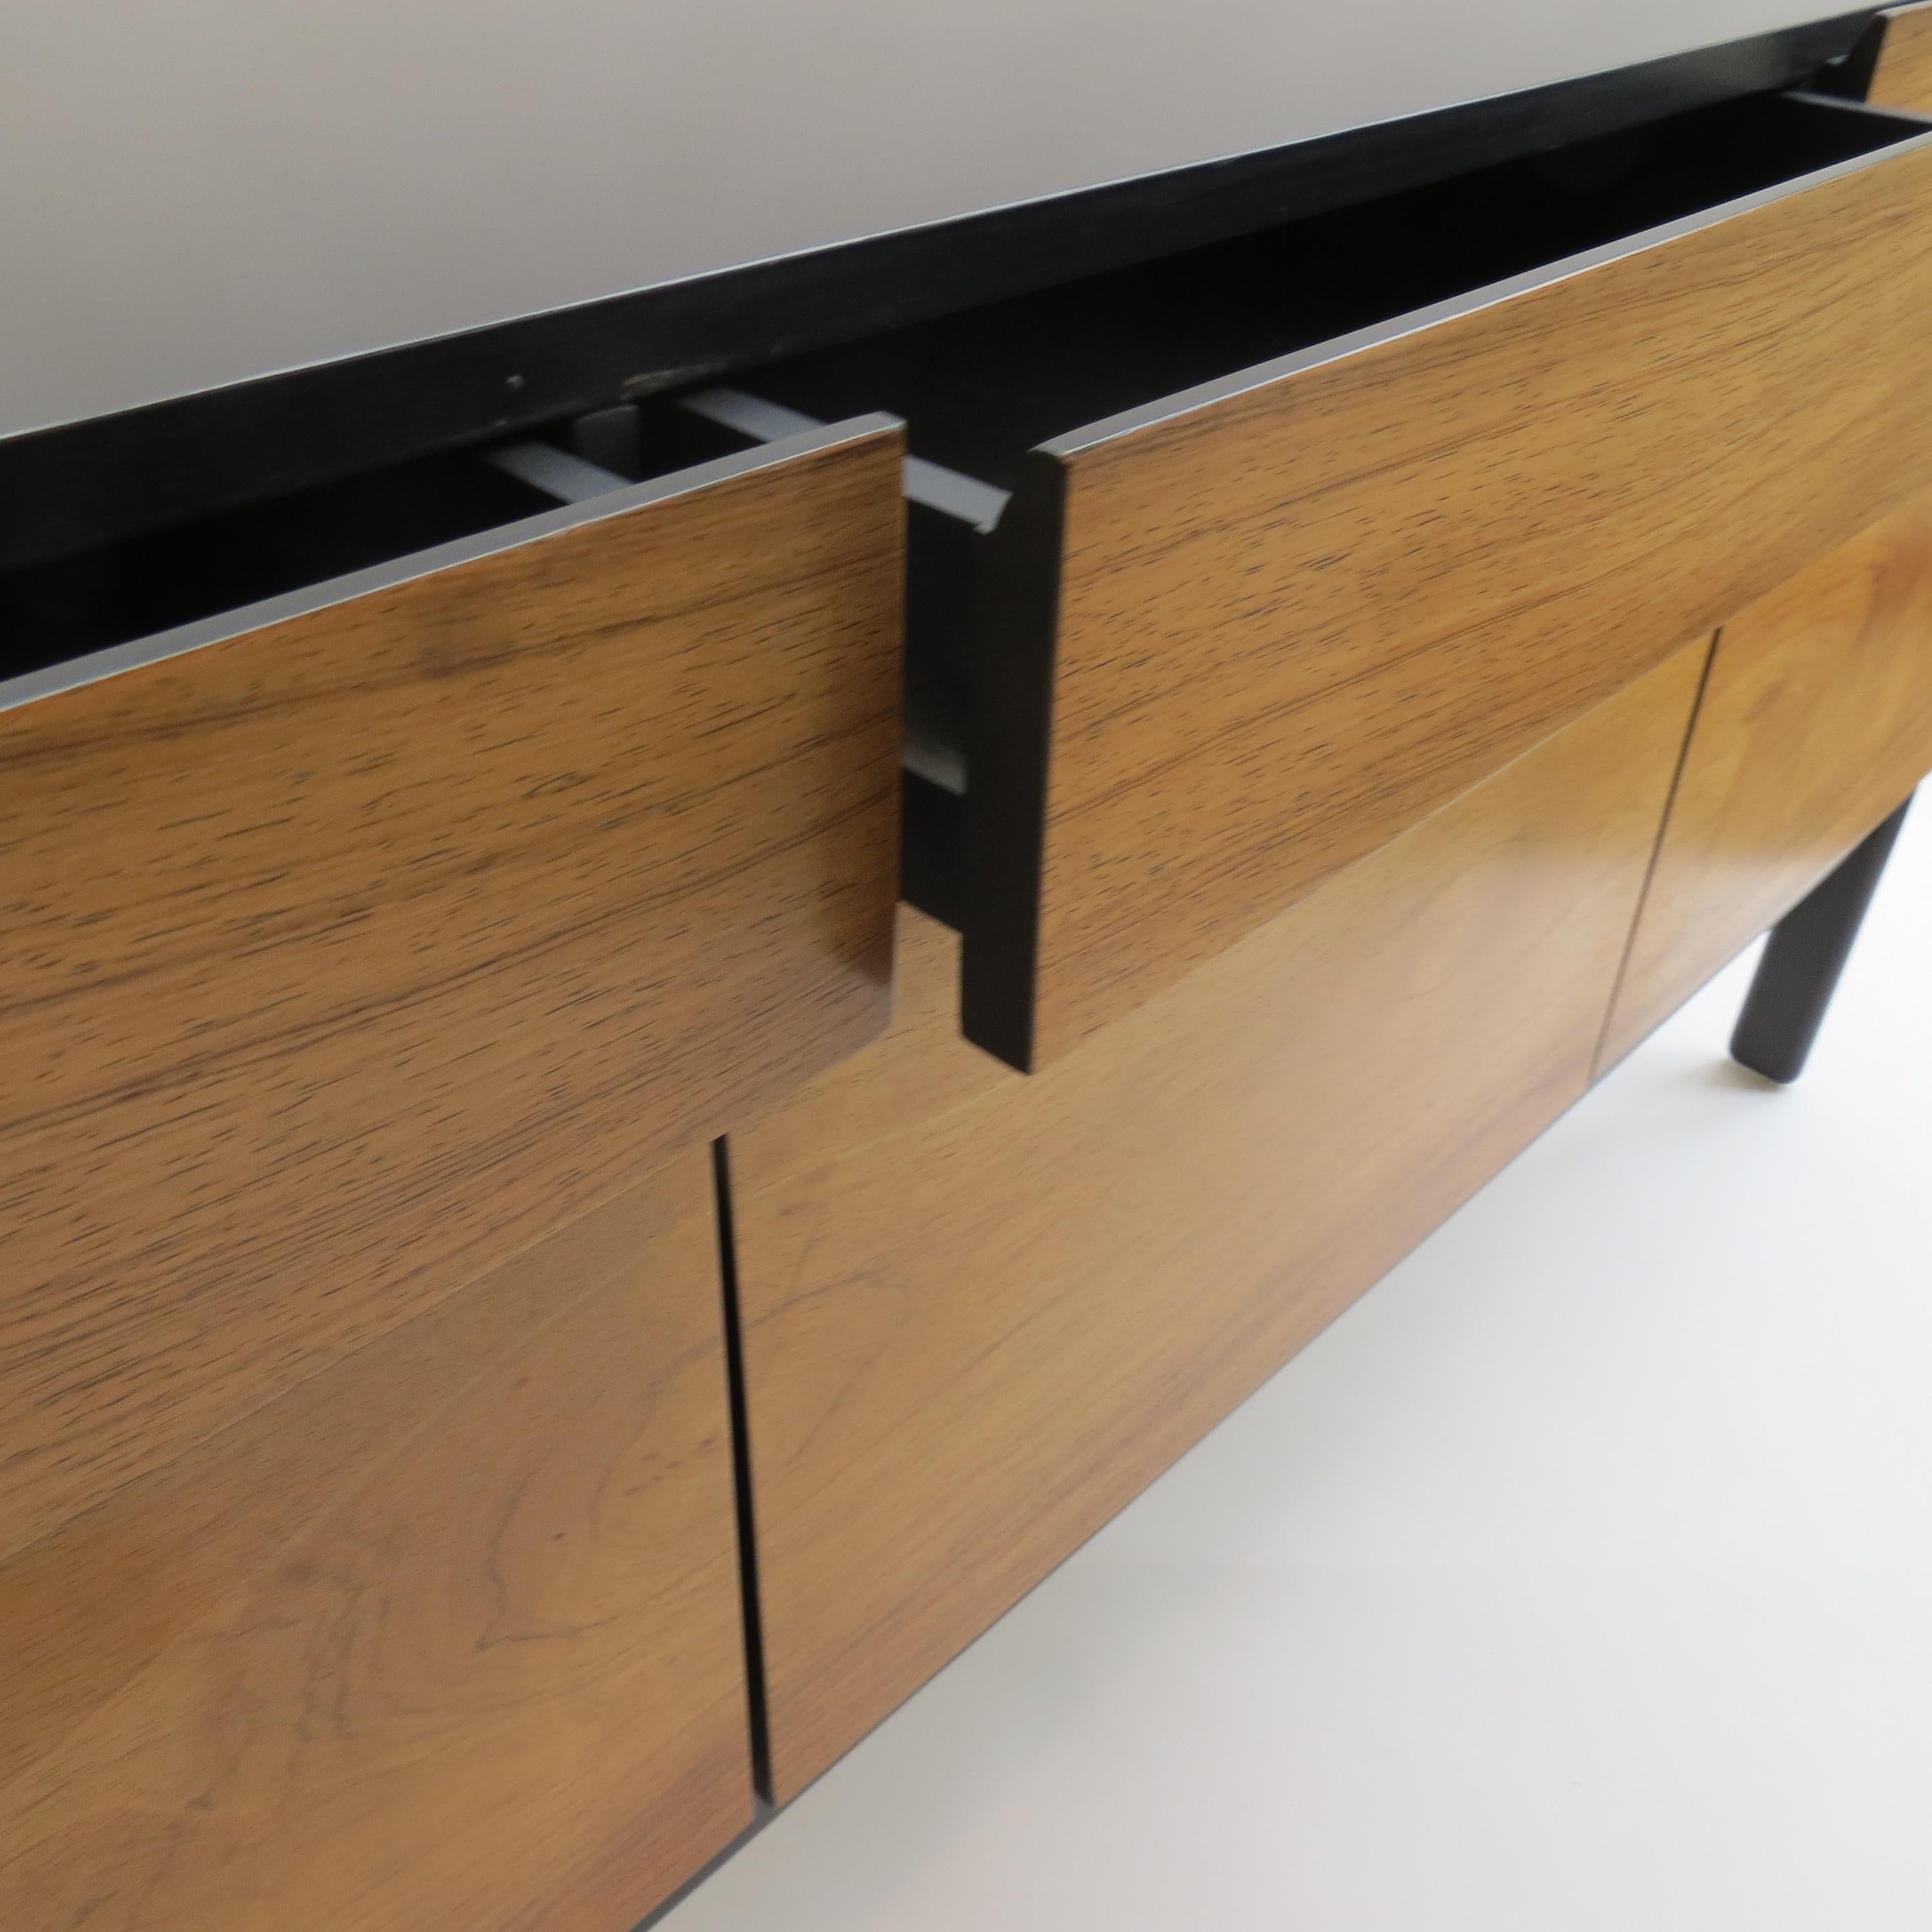 Midcentury sideboard with rosewood veneered doors and ebonised top and sides. Designed and produced by Arkana or Bath Cabinet Makers (they were both owned by the same group). Dated to the rear of the drawer 5 Nov 1970.
In good vintage condition.